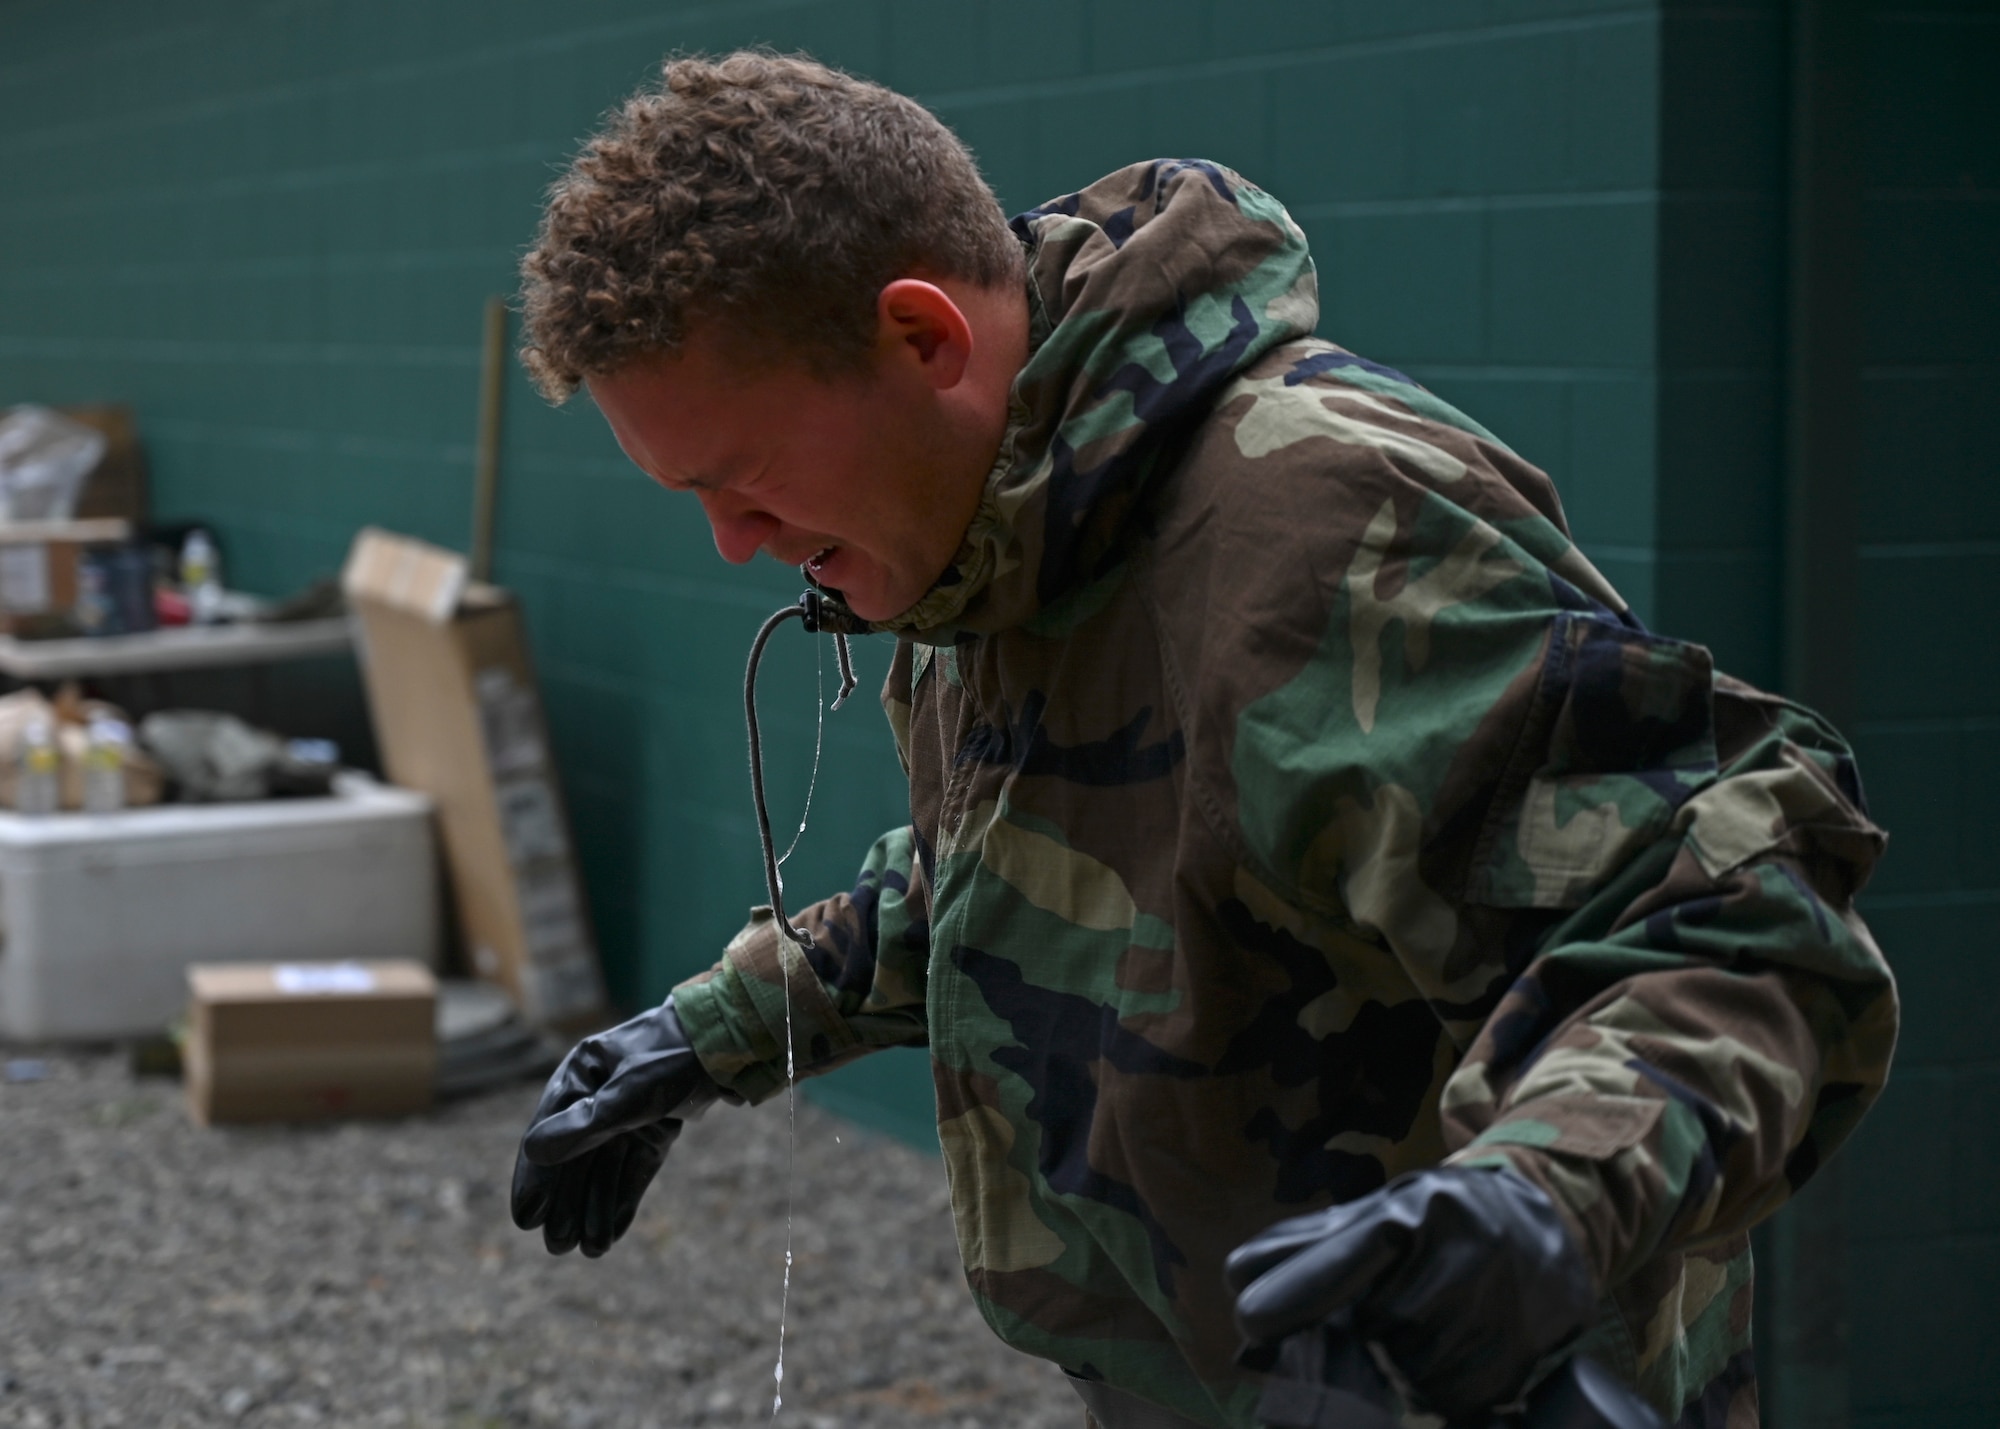 U.S. Air Force Senior Airman Steven Lapworth, electrical systems apprentice with the 627th Civil Engineer Squadron, exits the gas chamber during a joint exercise at Joint Base Lewis-McChord, Washington, Aug. 26, 2022. The 627th CES partnered with the 349th Chemical Company for a chemical, biological, radiological, and nuclear exercise to ensure Airmen are proficient in using a gas mask to prepare them for a biological or chemical attack. (U.S. Air Force photo by Senior Airman Callie Norton)